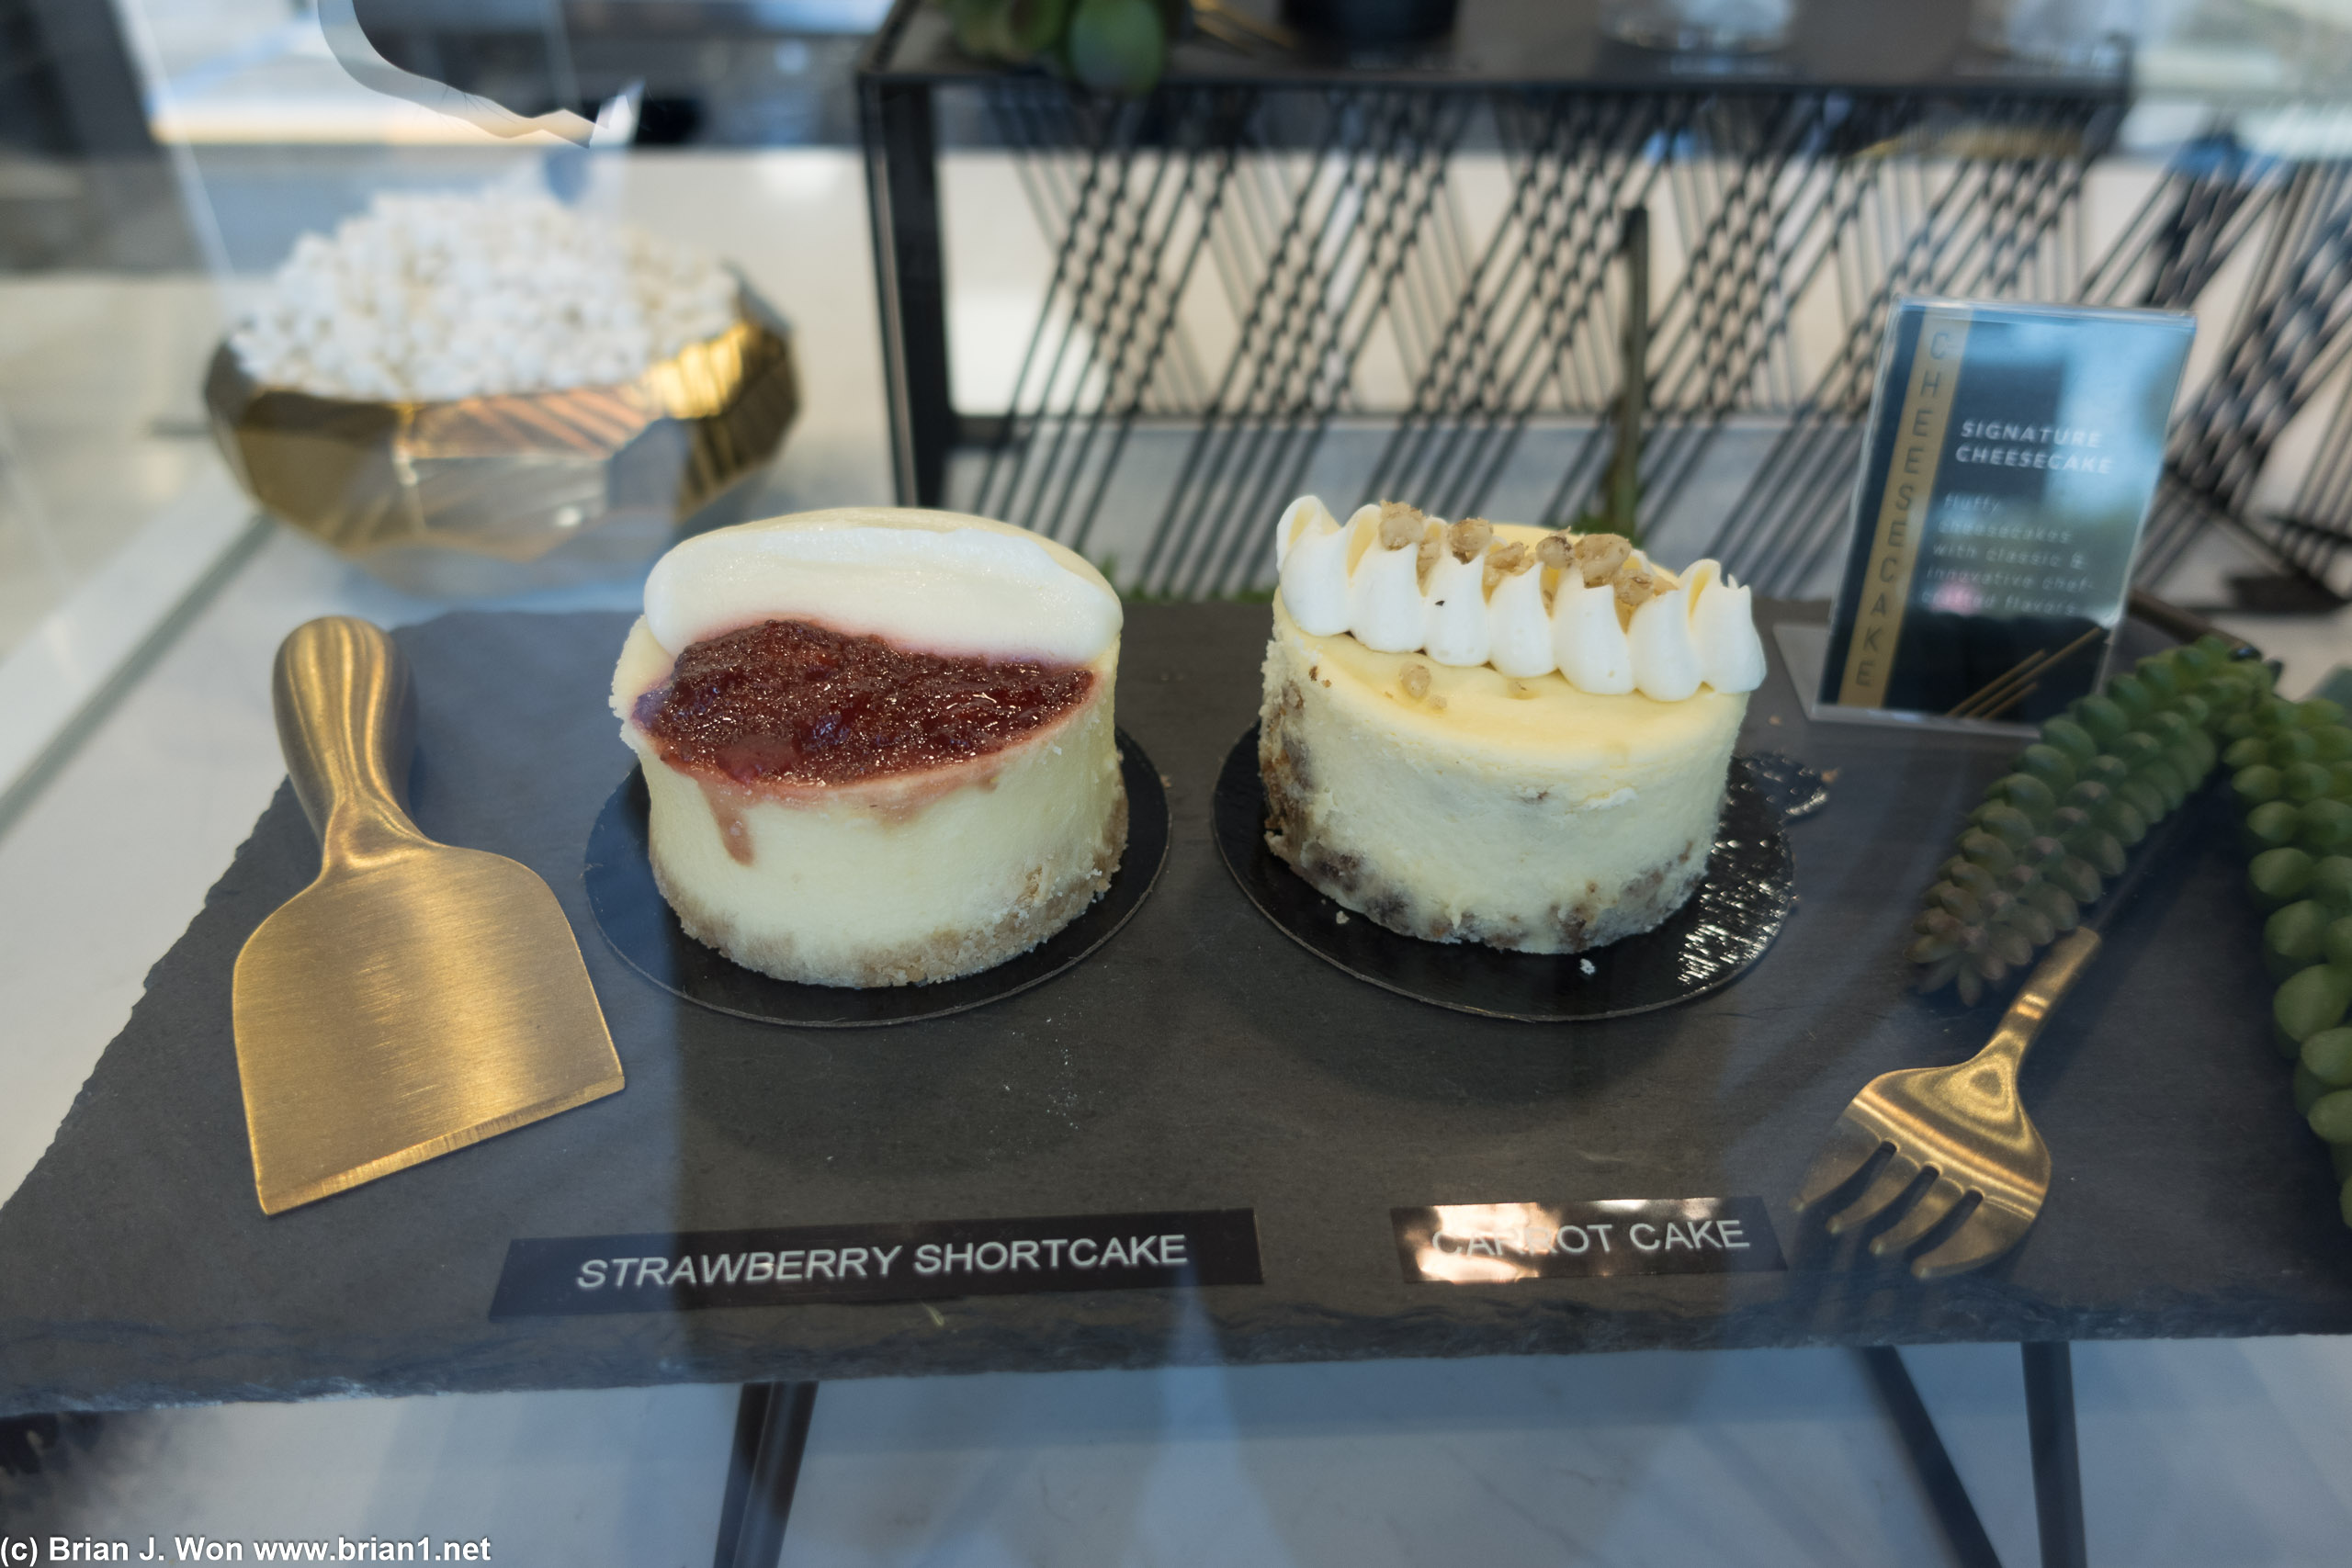 Cheesecakes look like a million calories. Per bite.